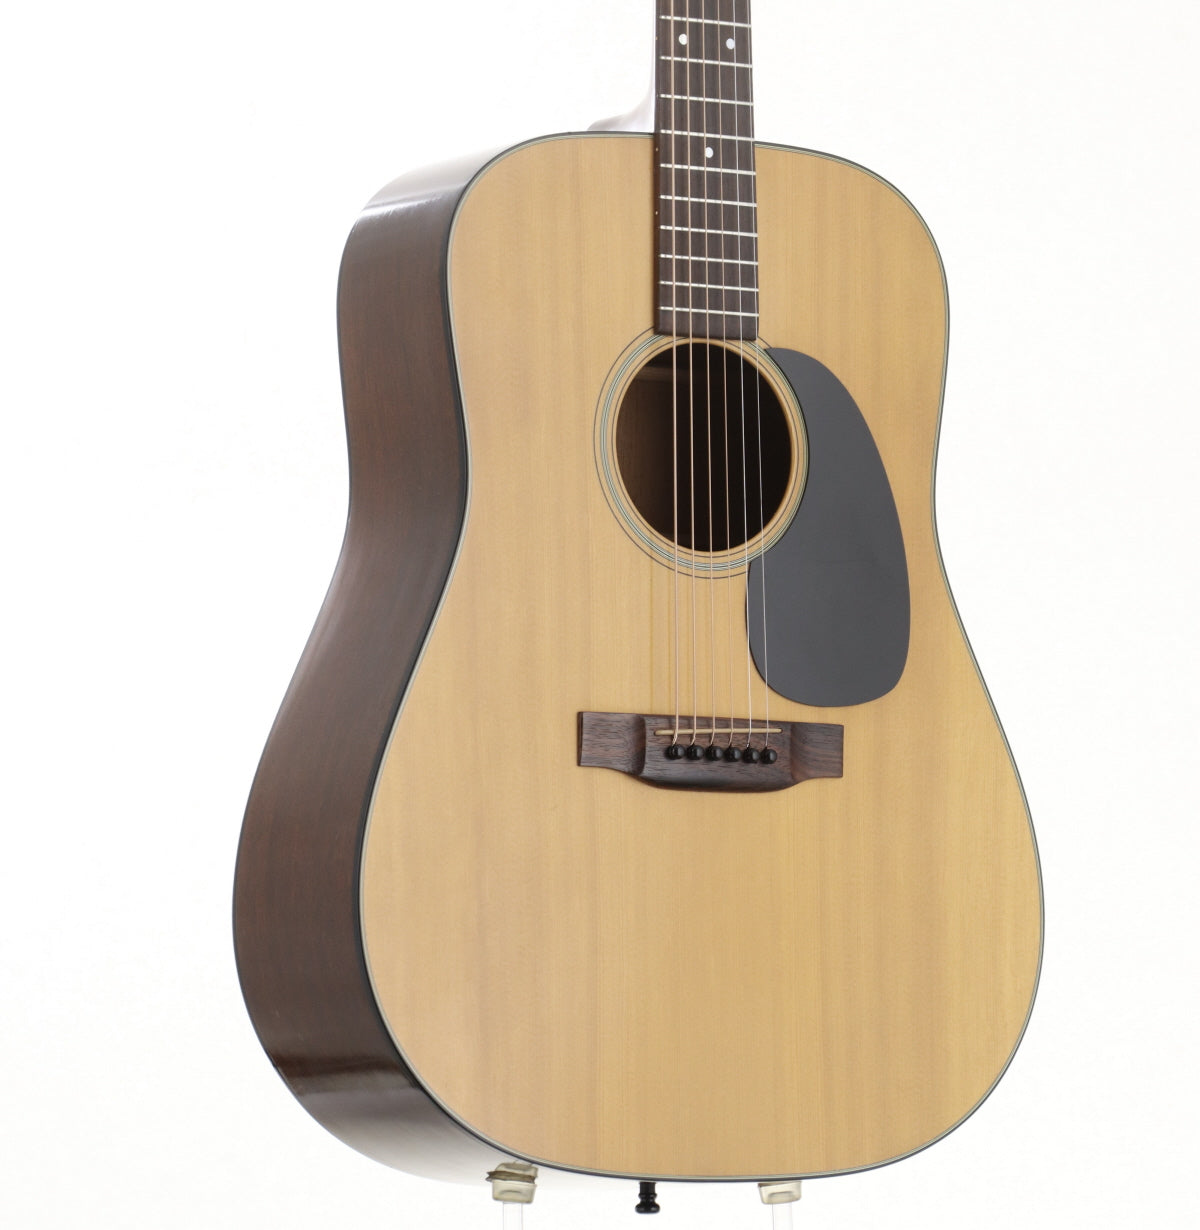 [SN 364201] USED MARTIN / D-18 made in 1975 [10]